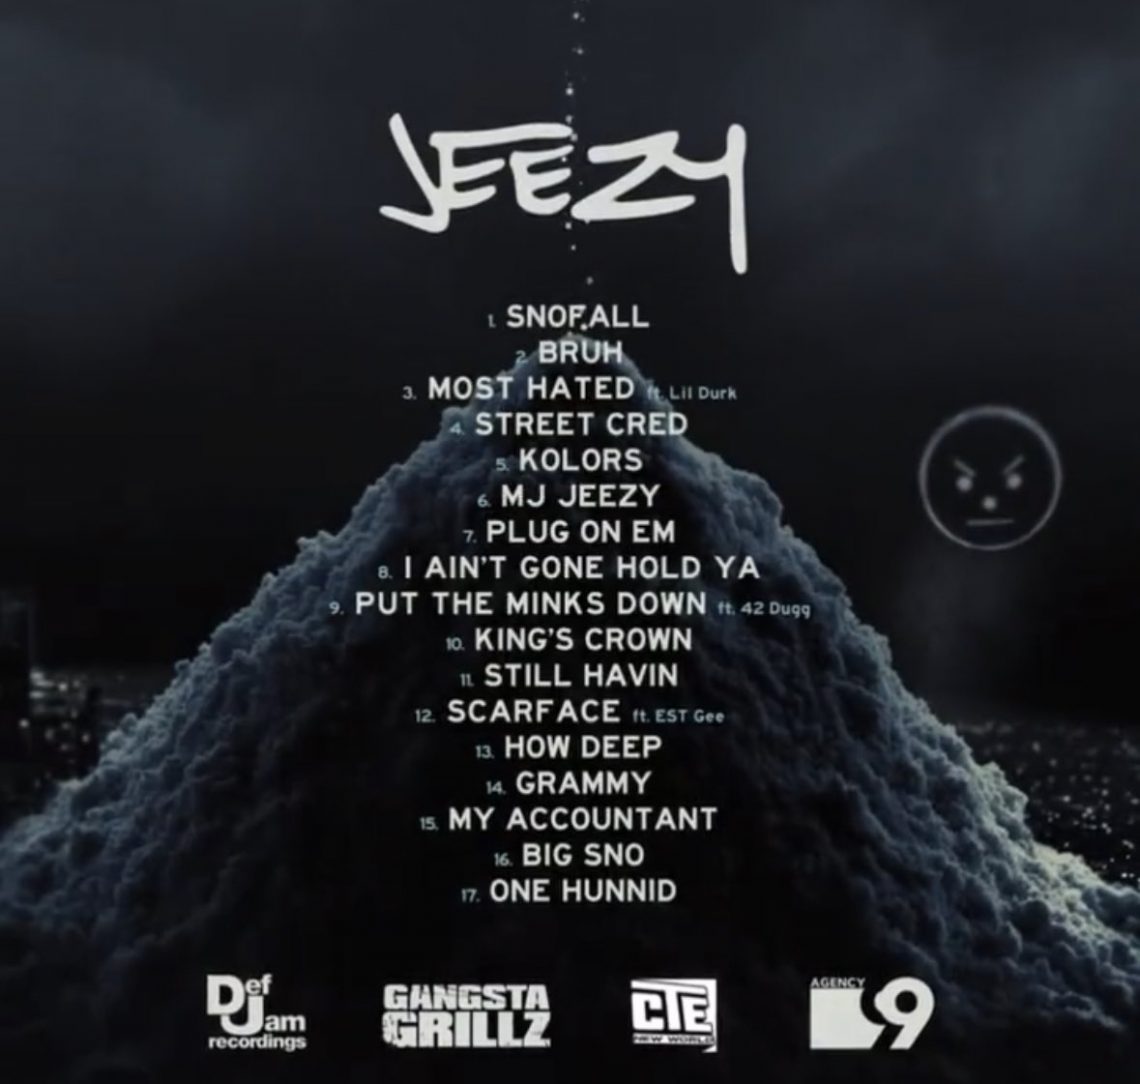 Jeezy And Dj Drama Release New Gangsta Grillz Album Sno Fall Stream Hiphop N More